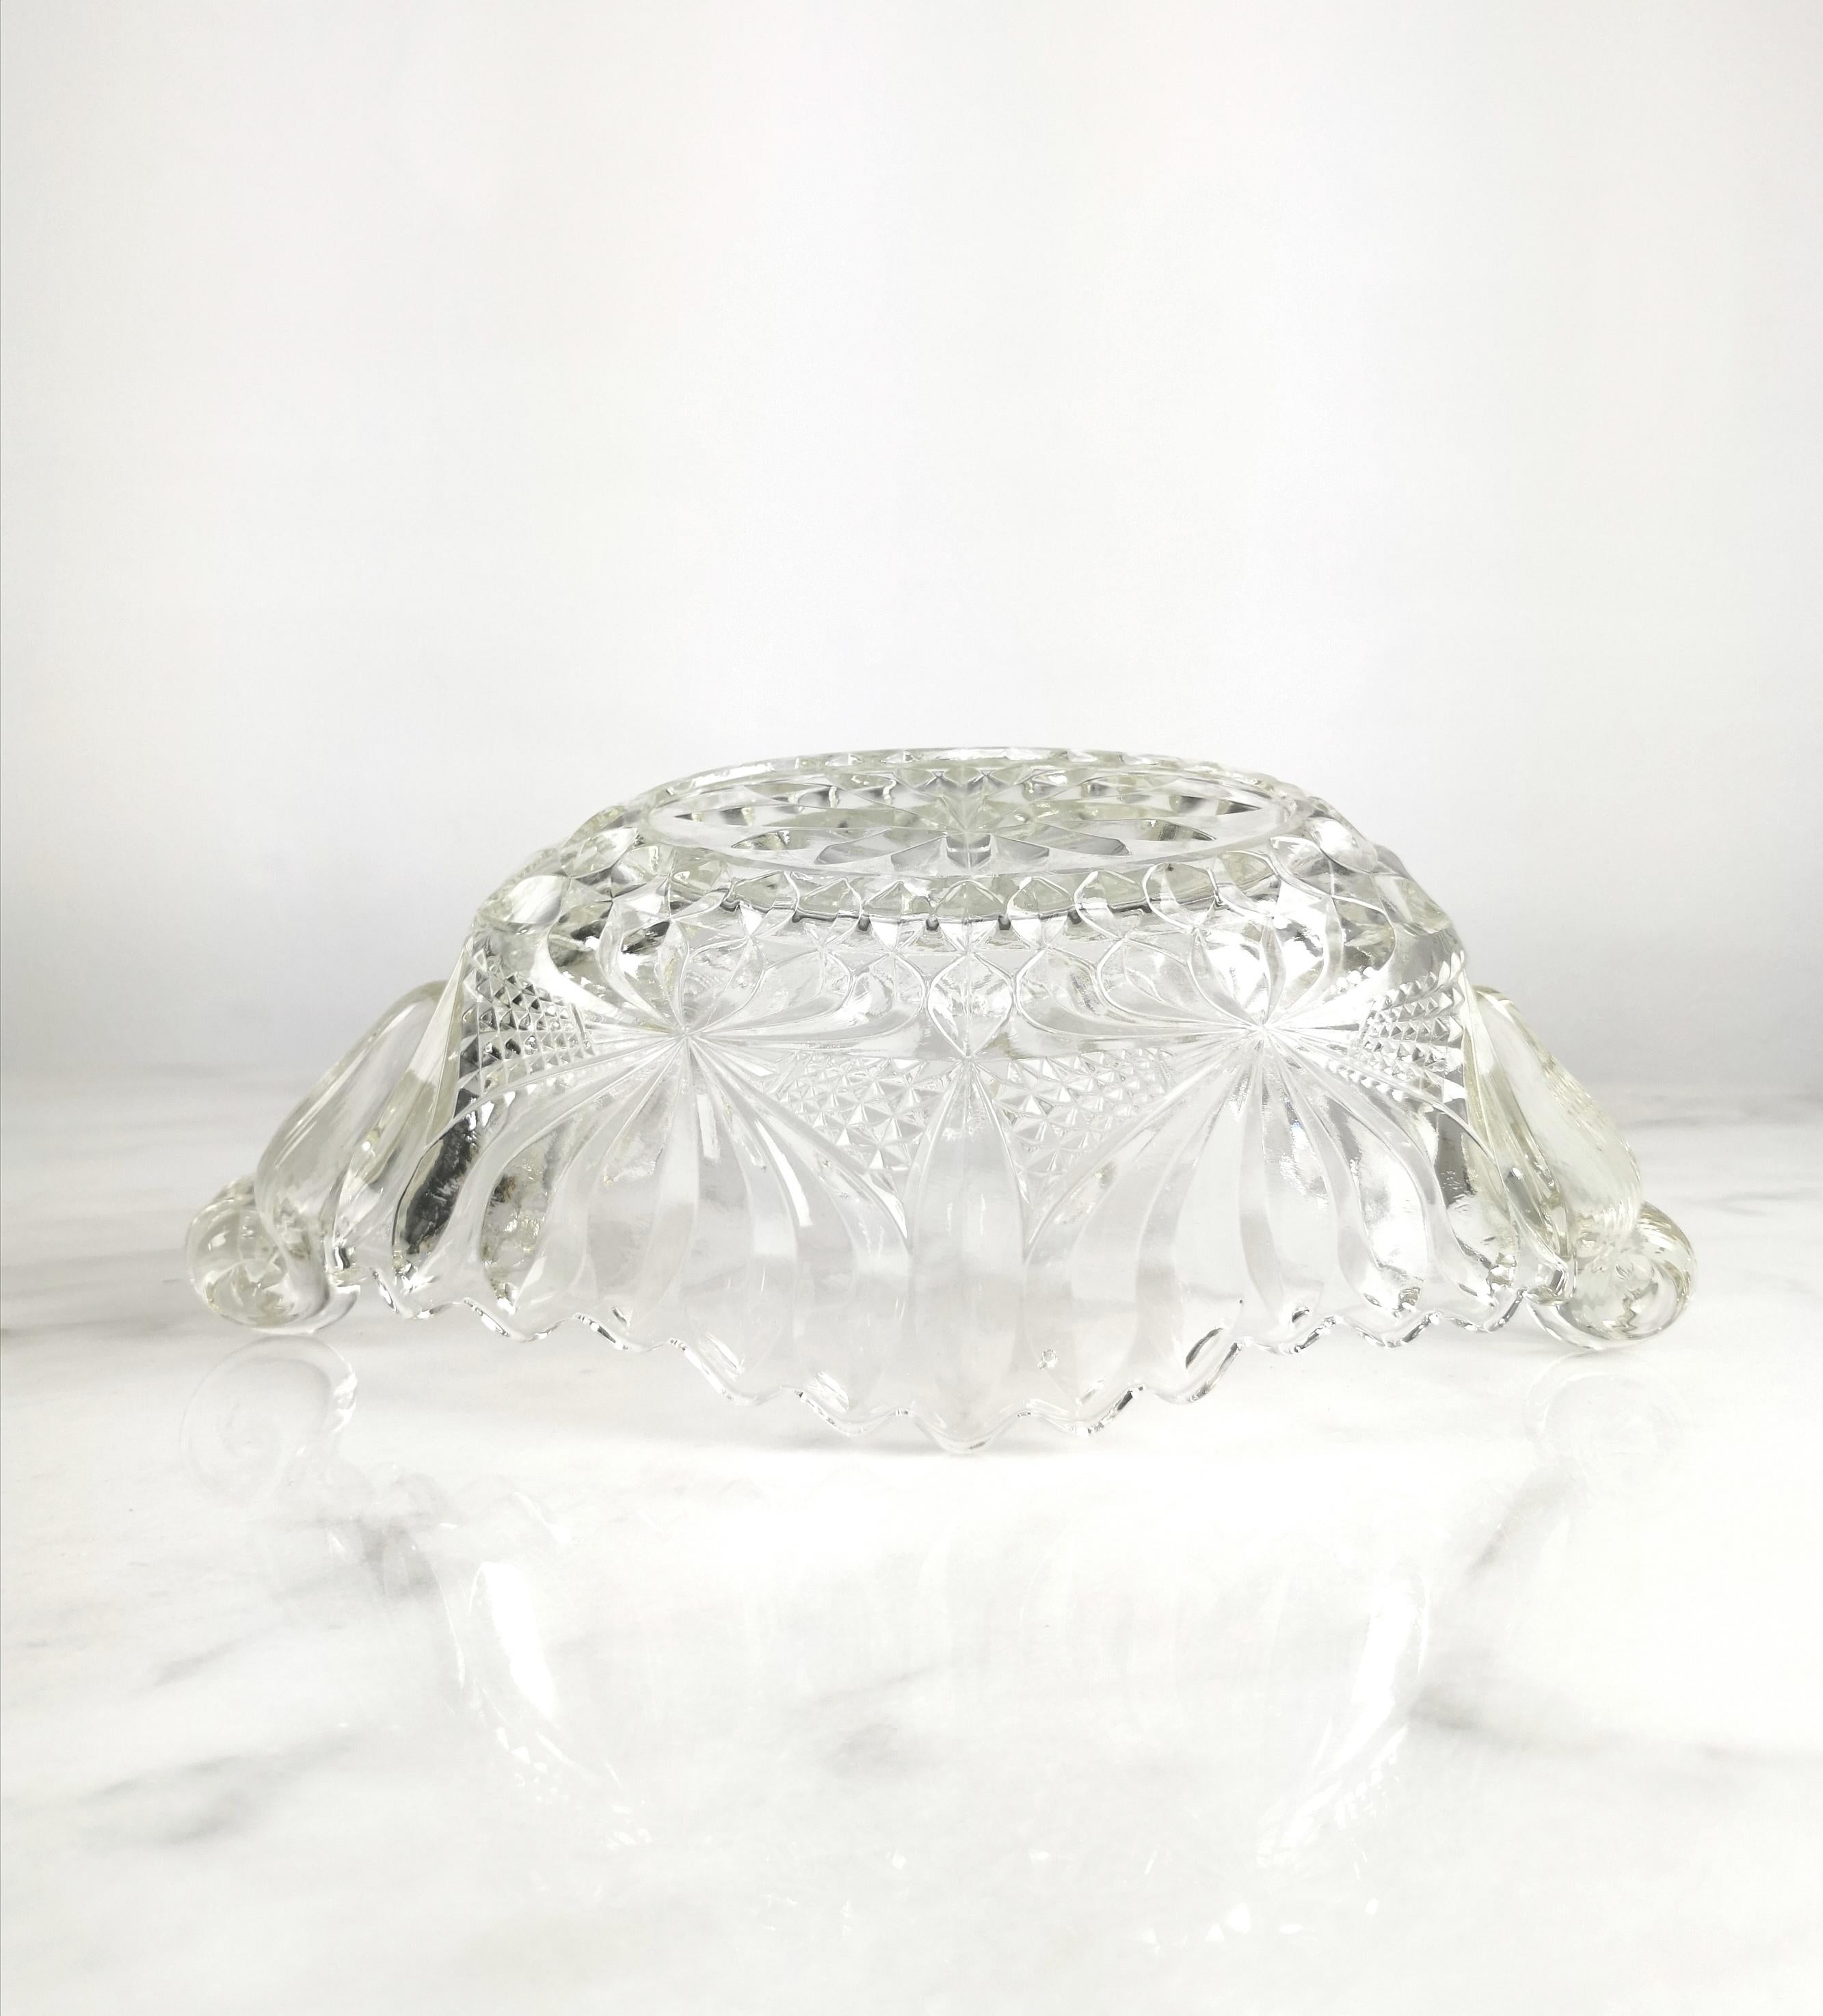 Centerpiece Carved Crystal Glass Transparent Mid-Century Italian Design, 1950s For Sale 4